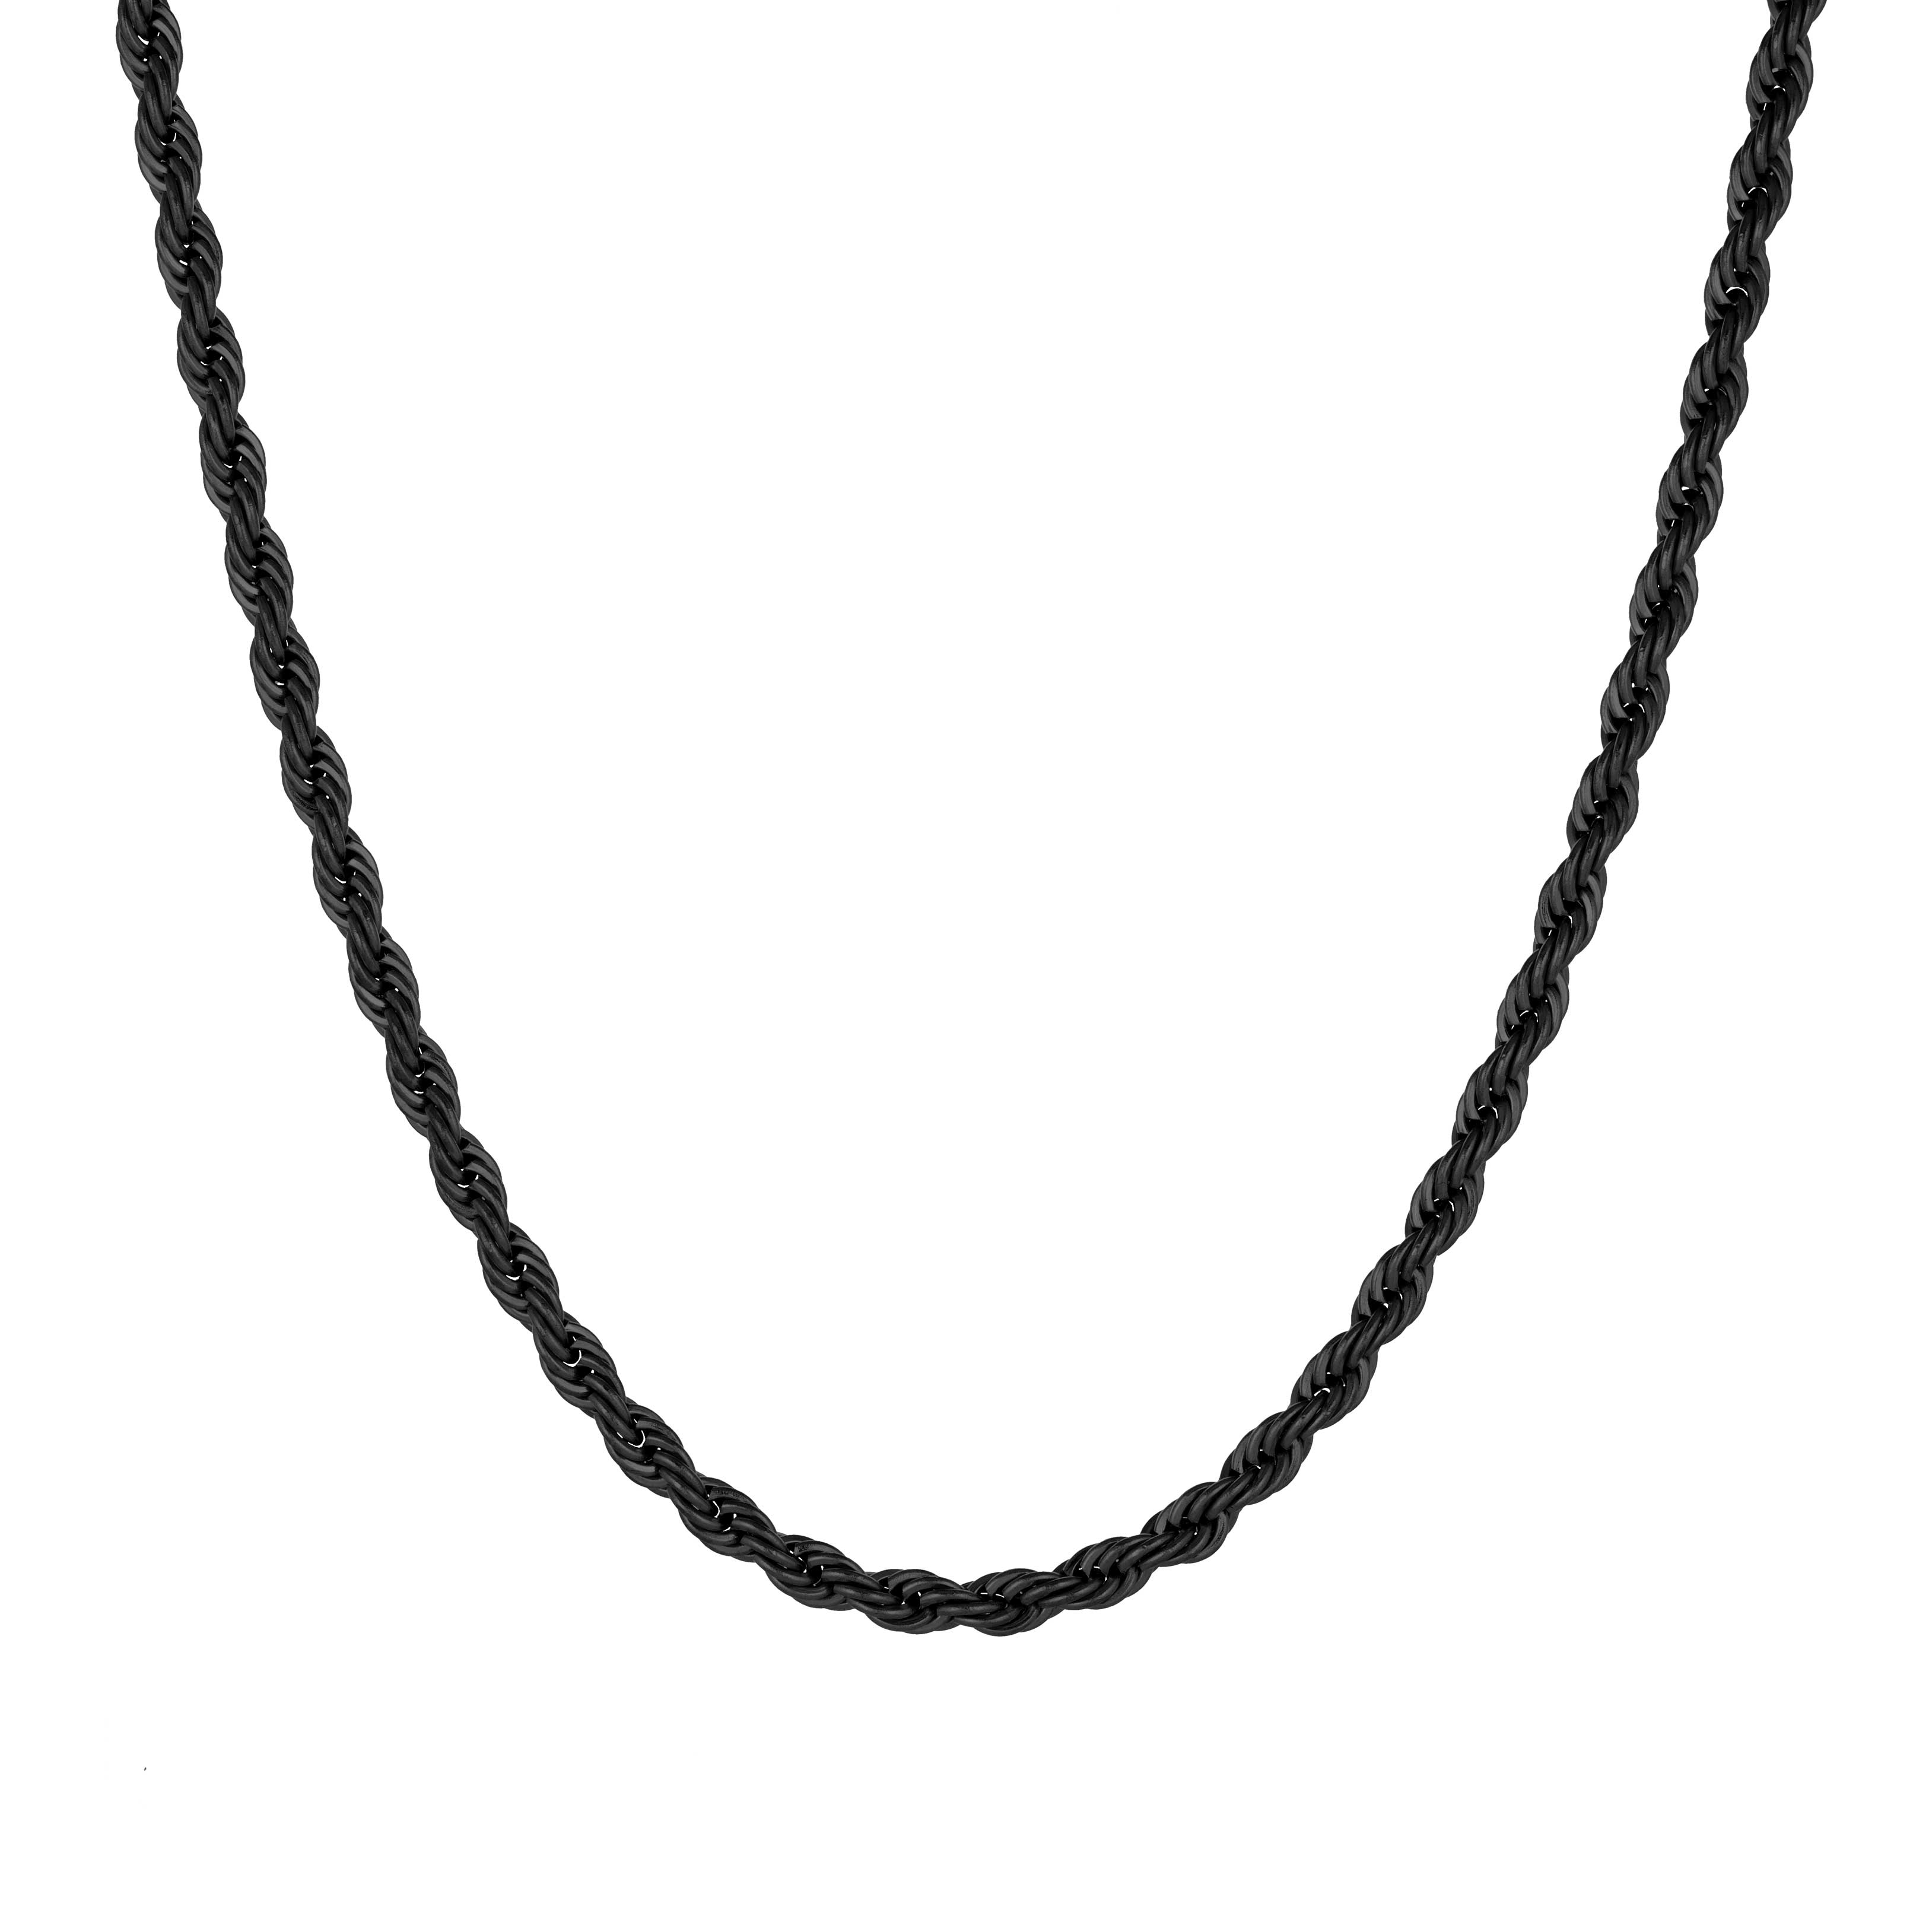 Carson Stainless Steel Rope Chain Necklace